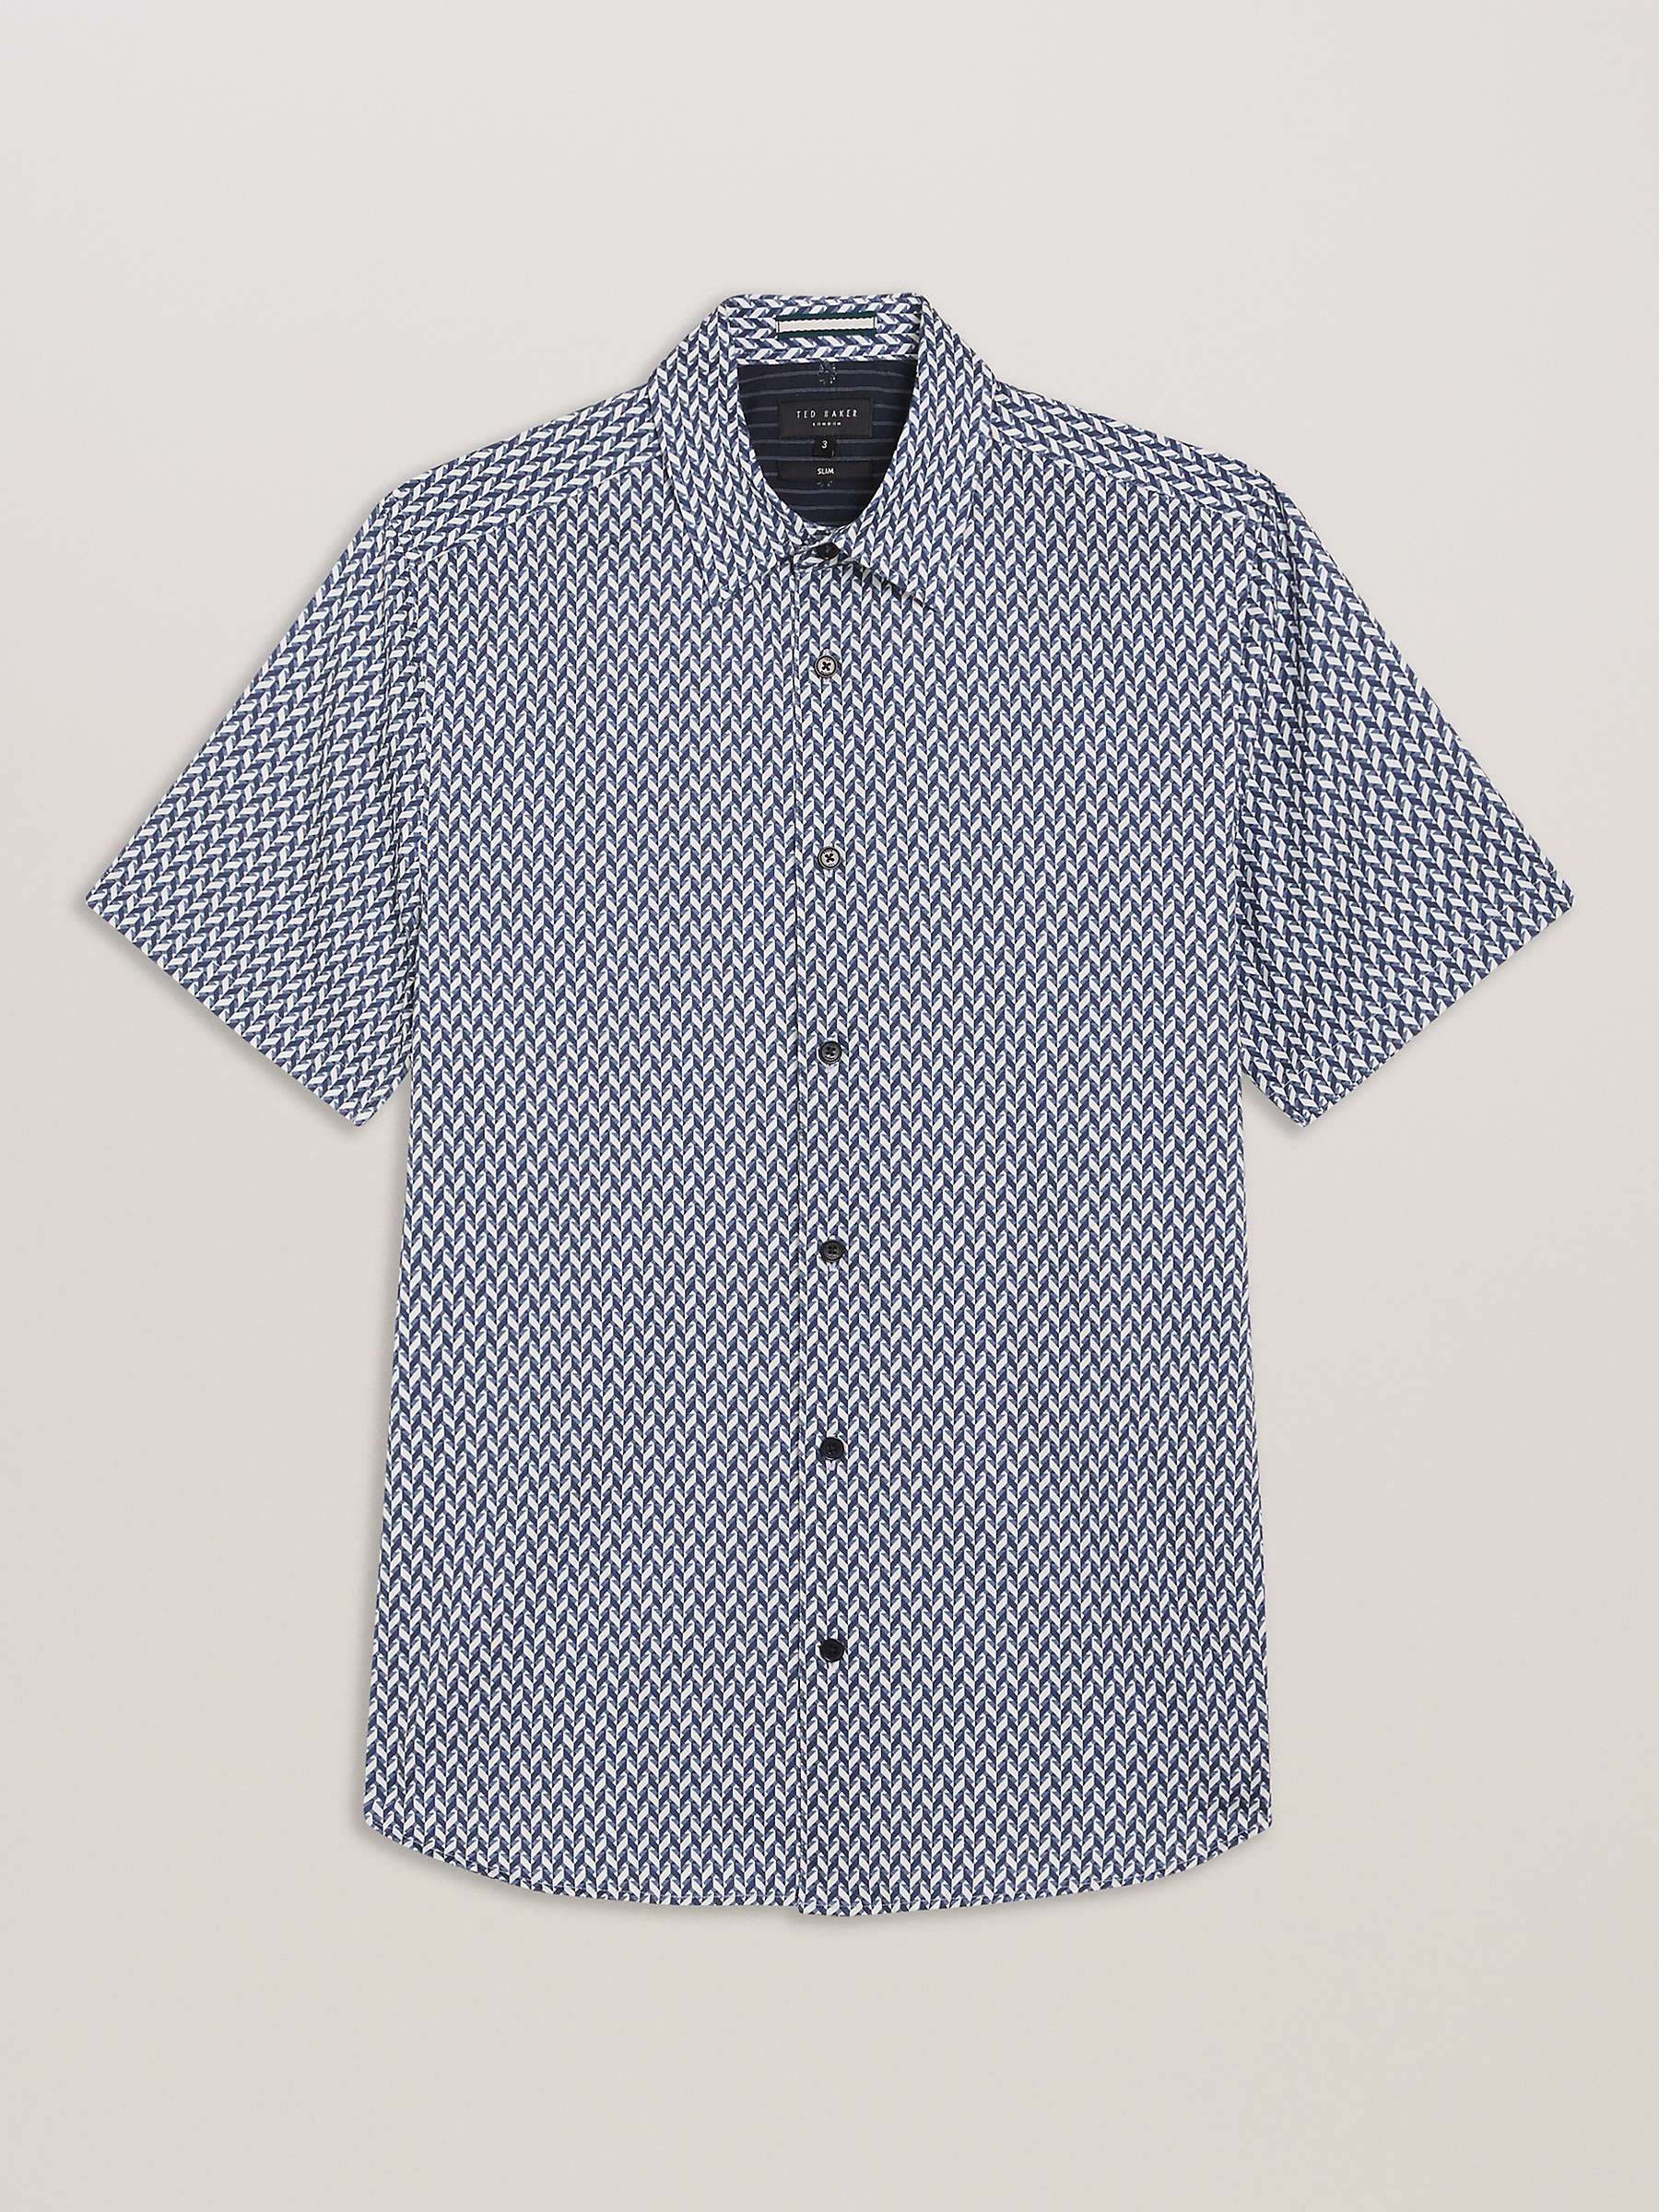 Buy Ted Baker Lacesho Graphic Print Slim Fit Shirt, Navy Online at johnlewis.com